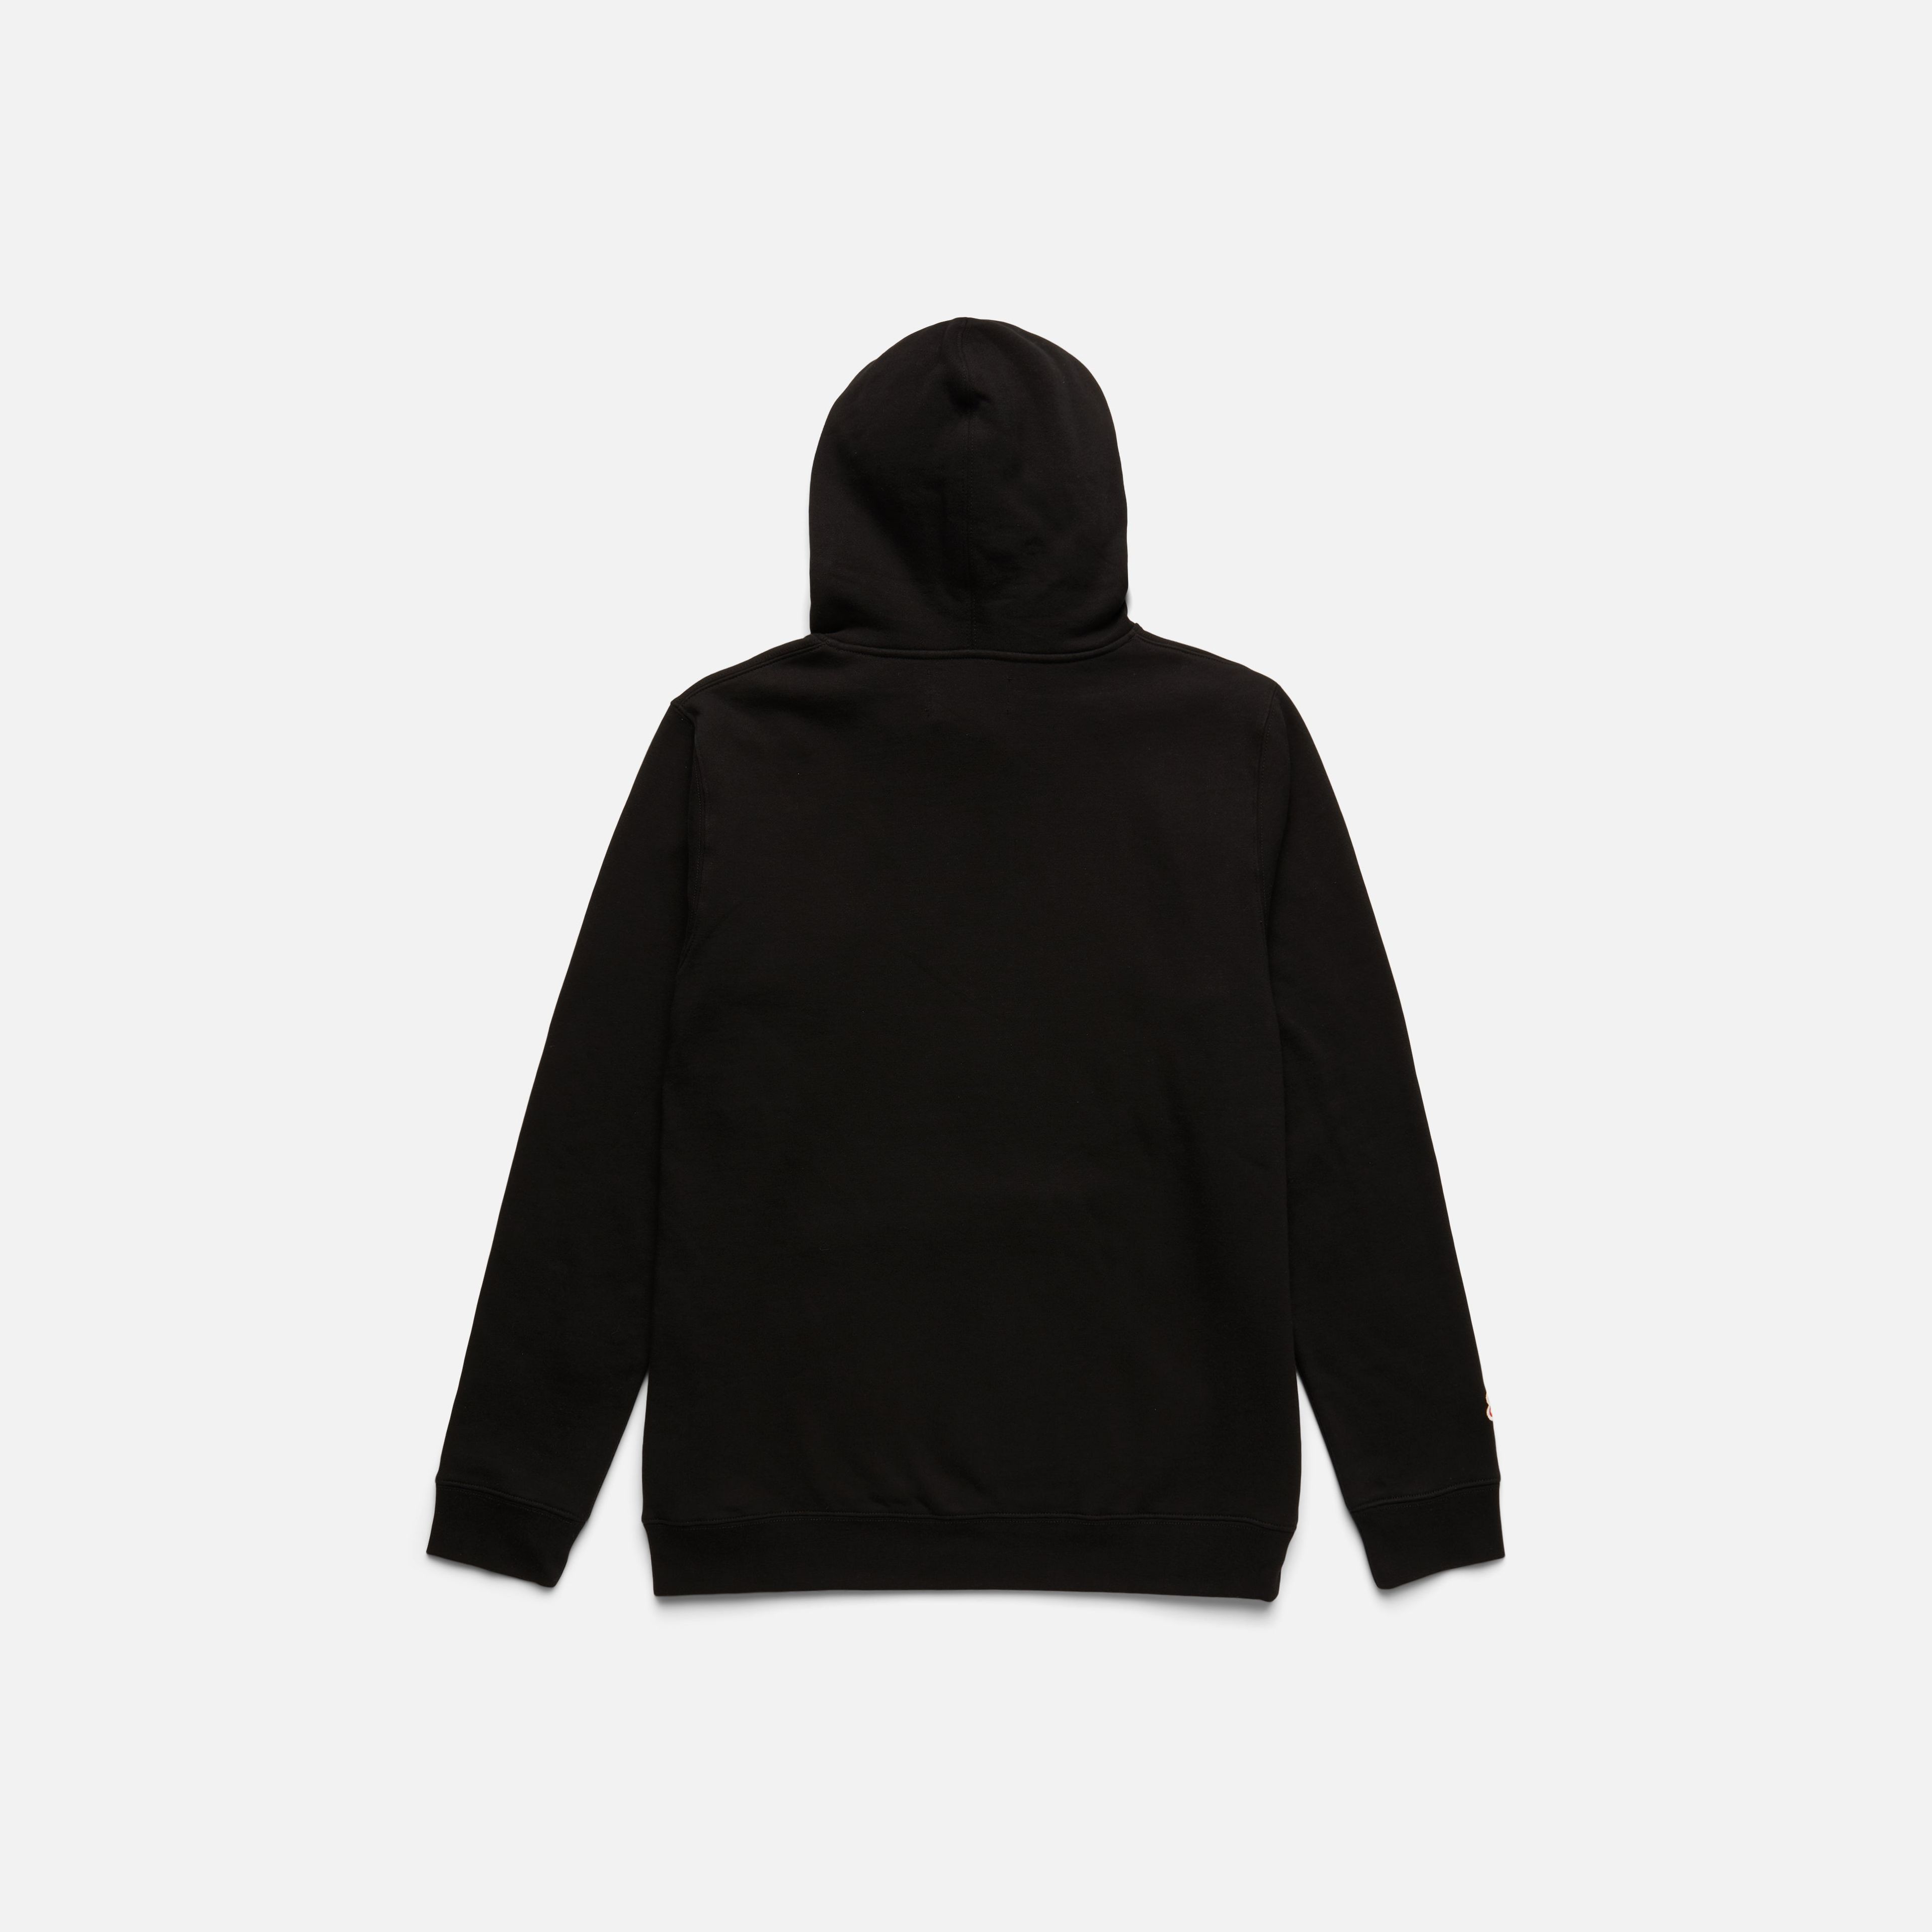 Trappy Colors Hoodie